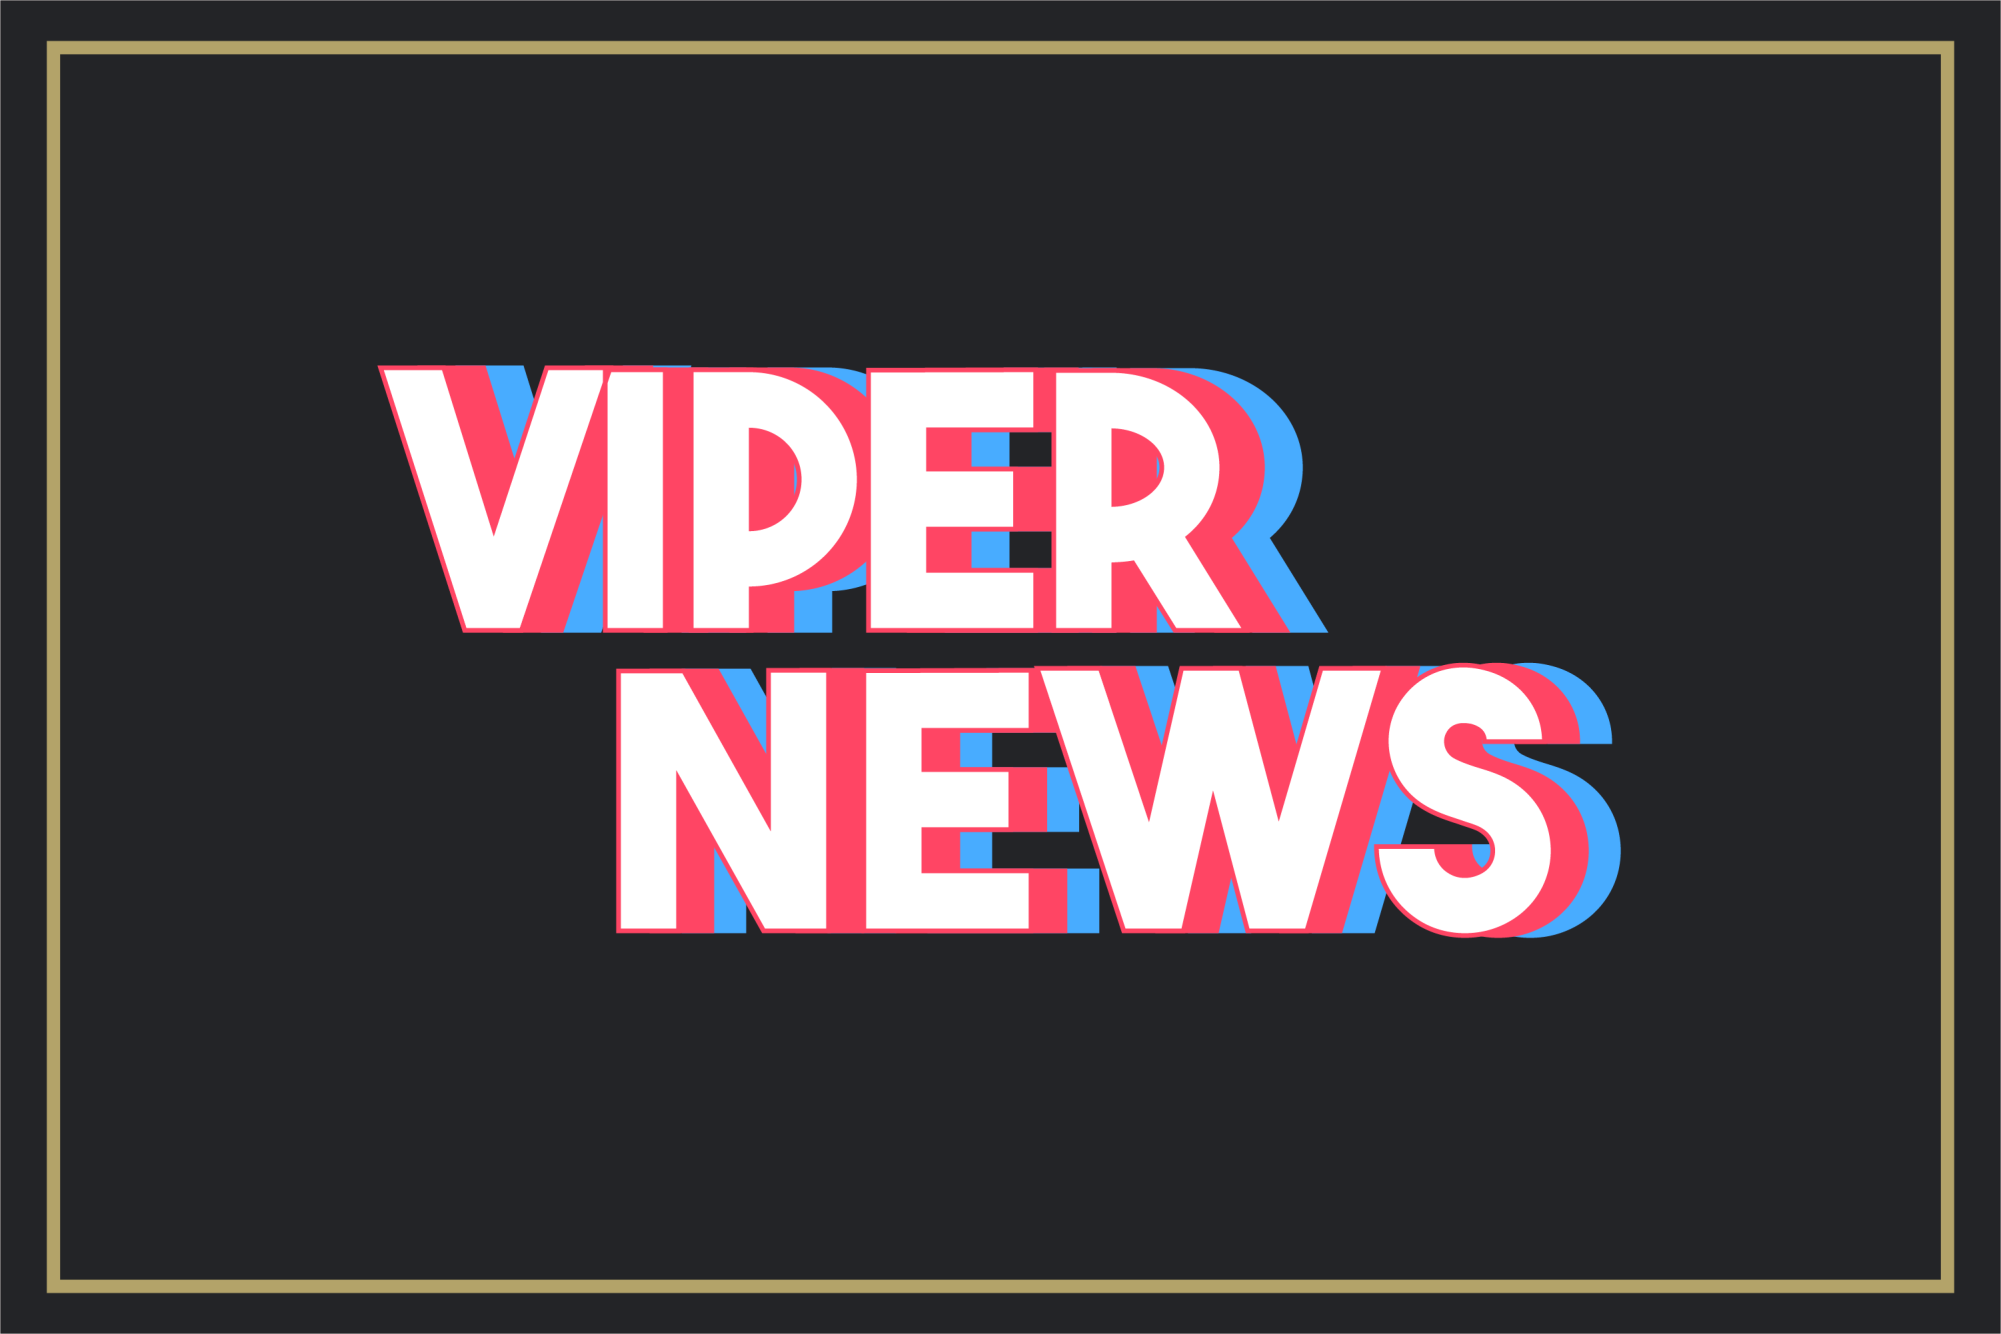 When you need the News fast, its Viper News; breaking stories from around Verrado High School. Graphic courtesy of Caleb Balos.